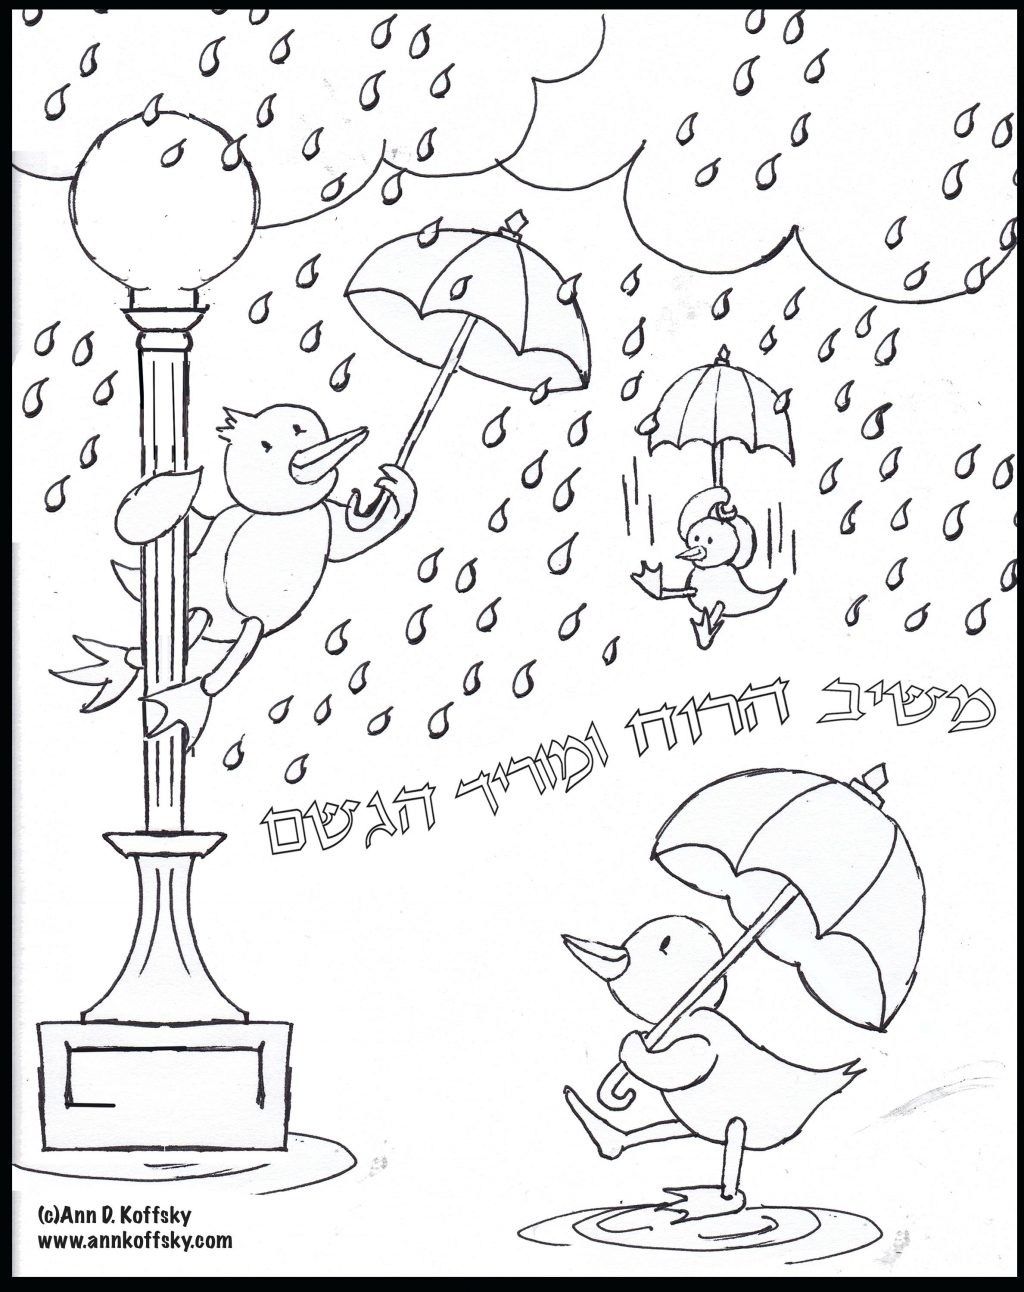 Wonderful picture of rainy day coloring pages